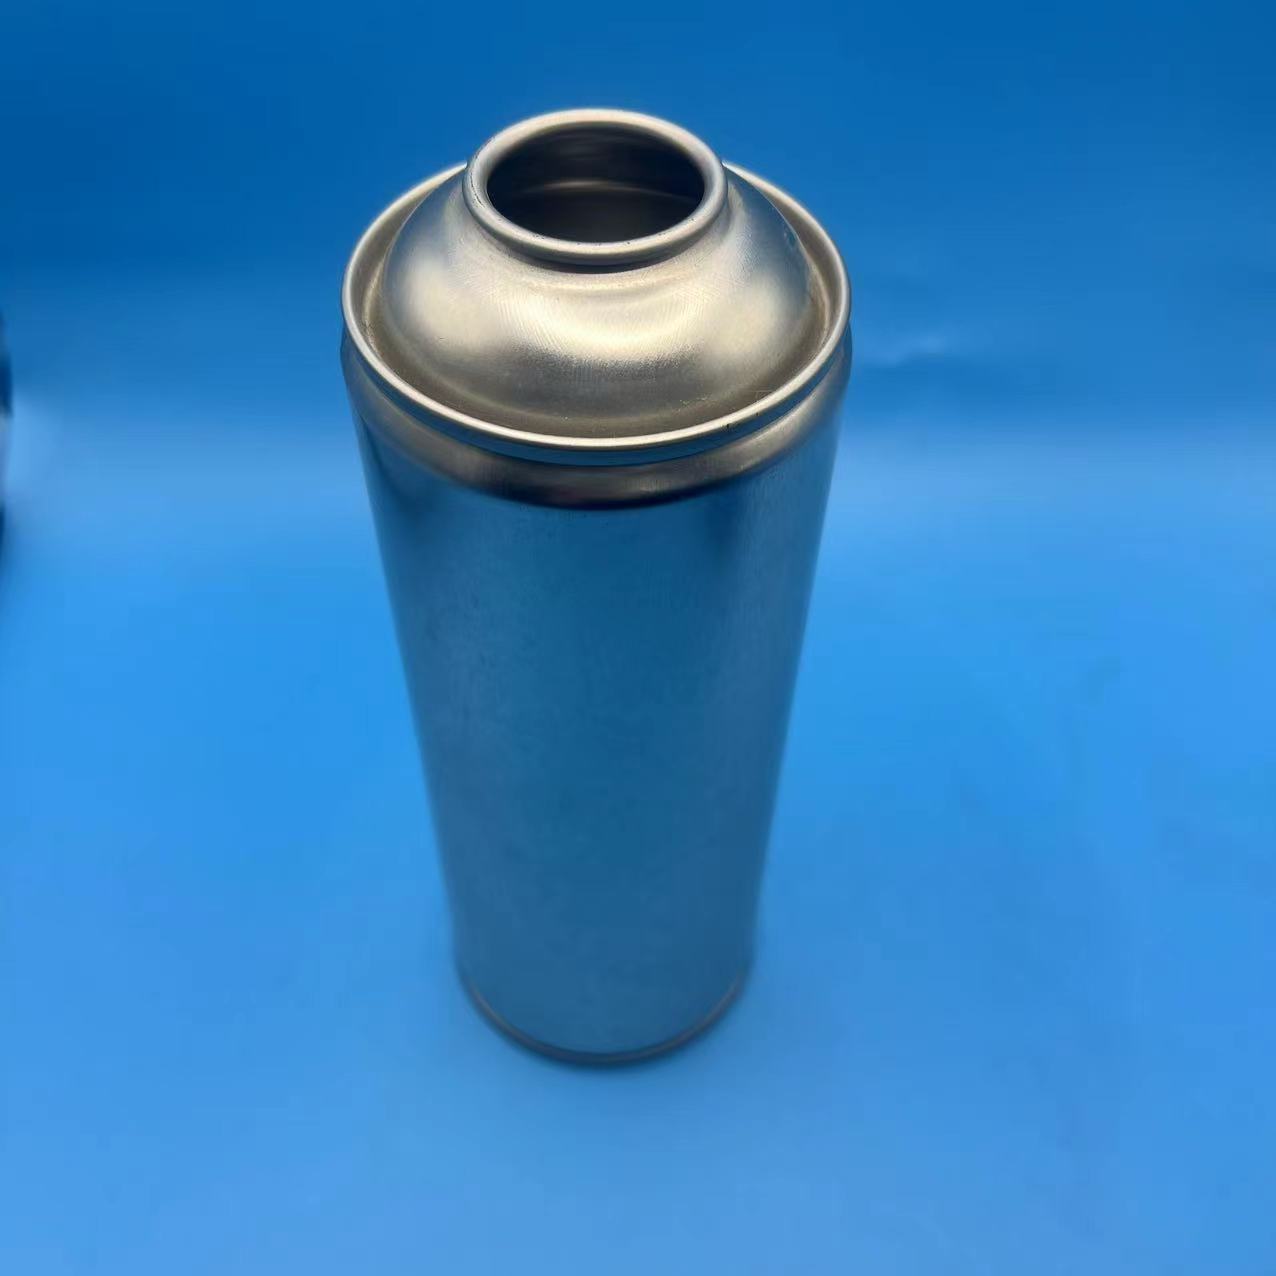 Reliable Butane Gas Cartridge for Outdoor Camping And Cooking - High-Quality Portable Fuel Canister